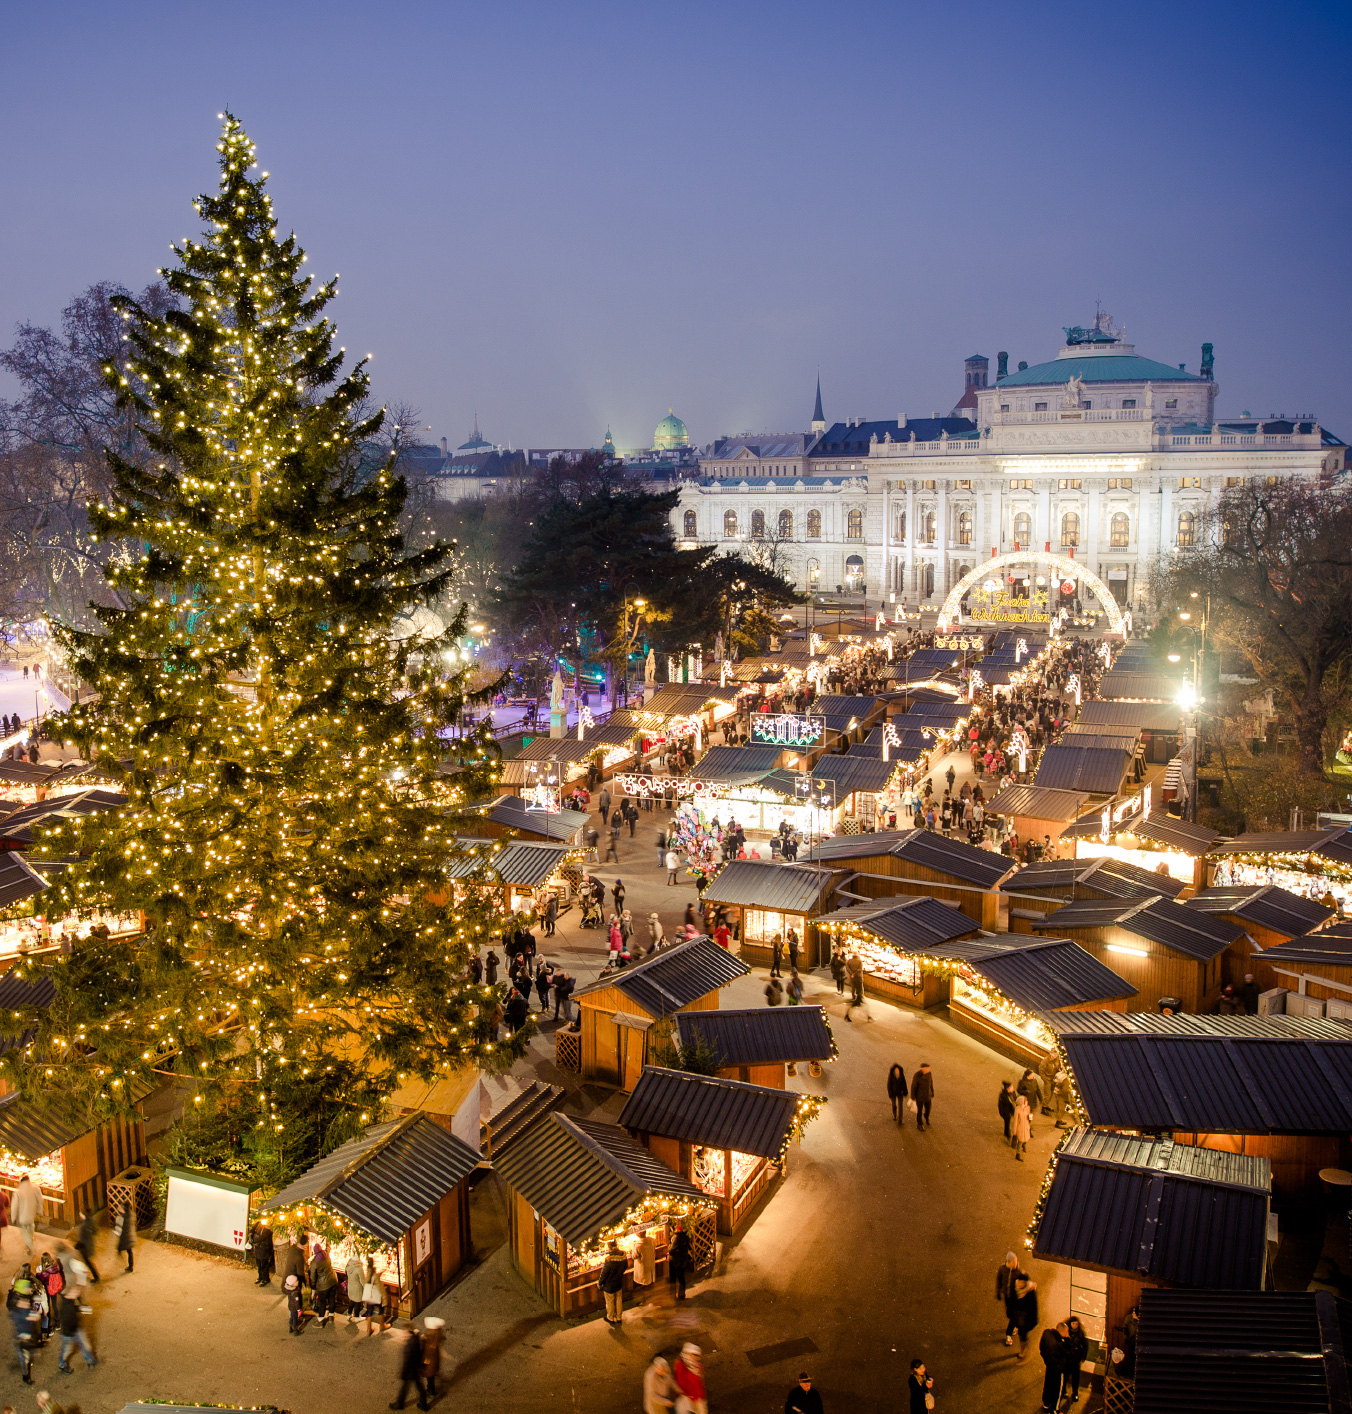 Christmas markets & winter magic in the heart of Europe